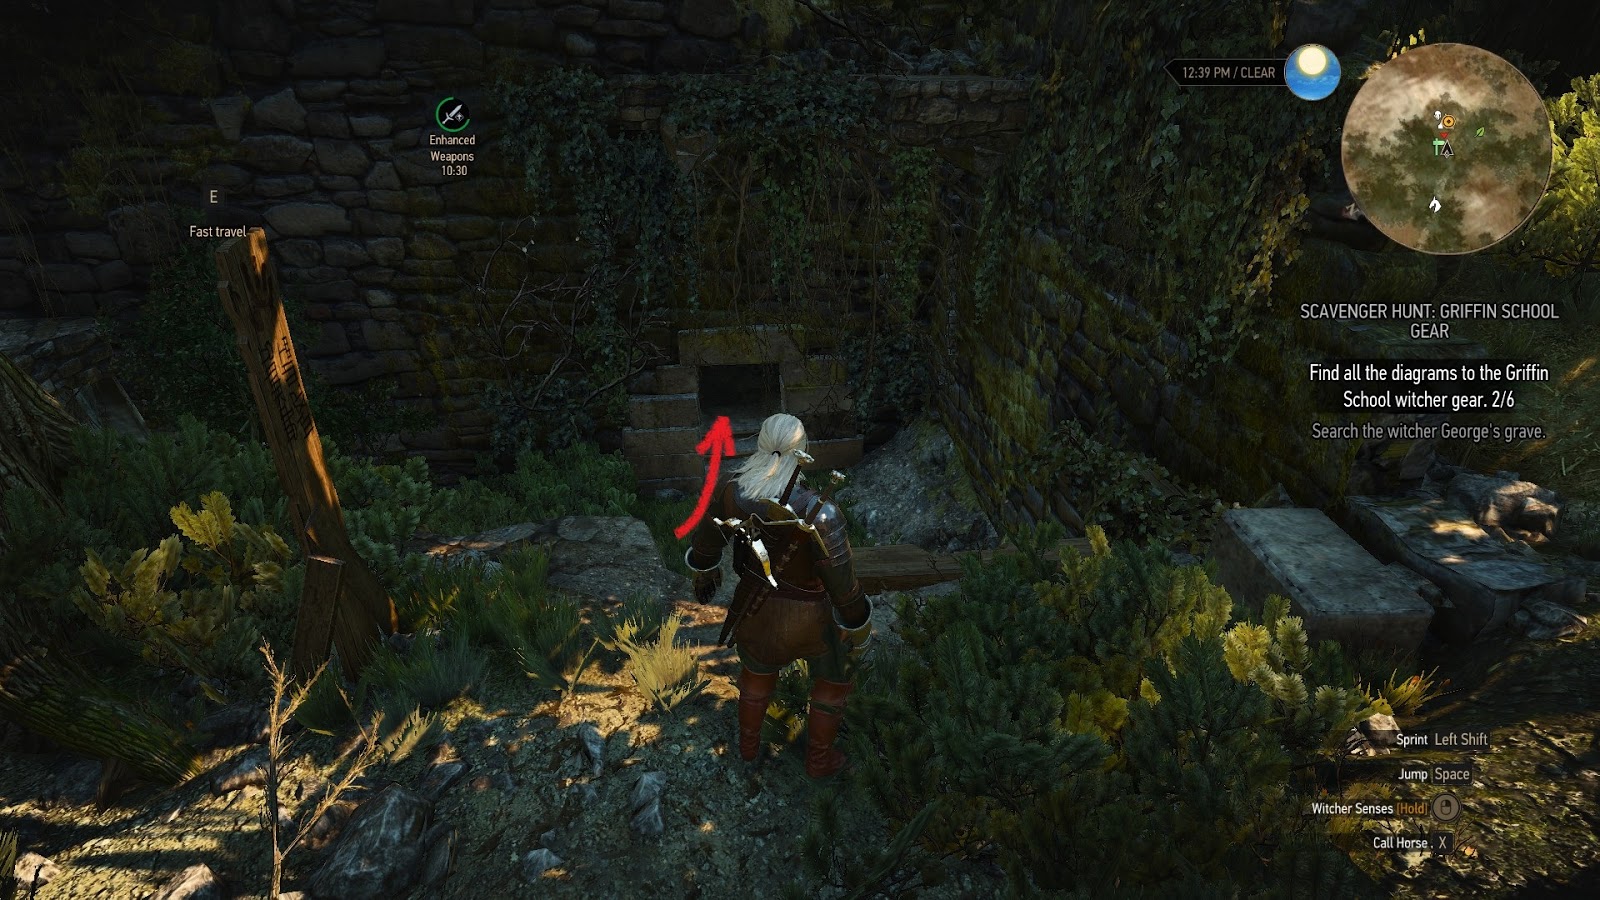 The witcher 3 griffin school hunt фото 6